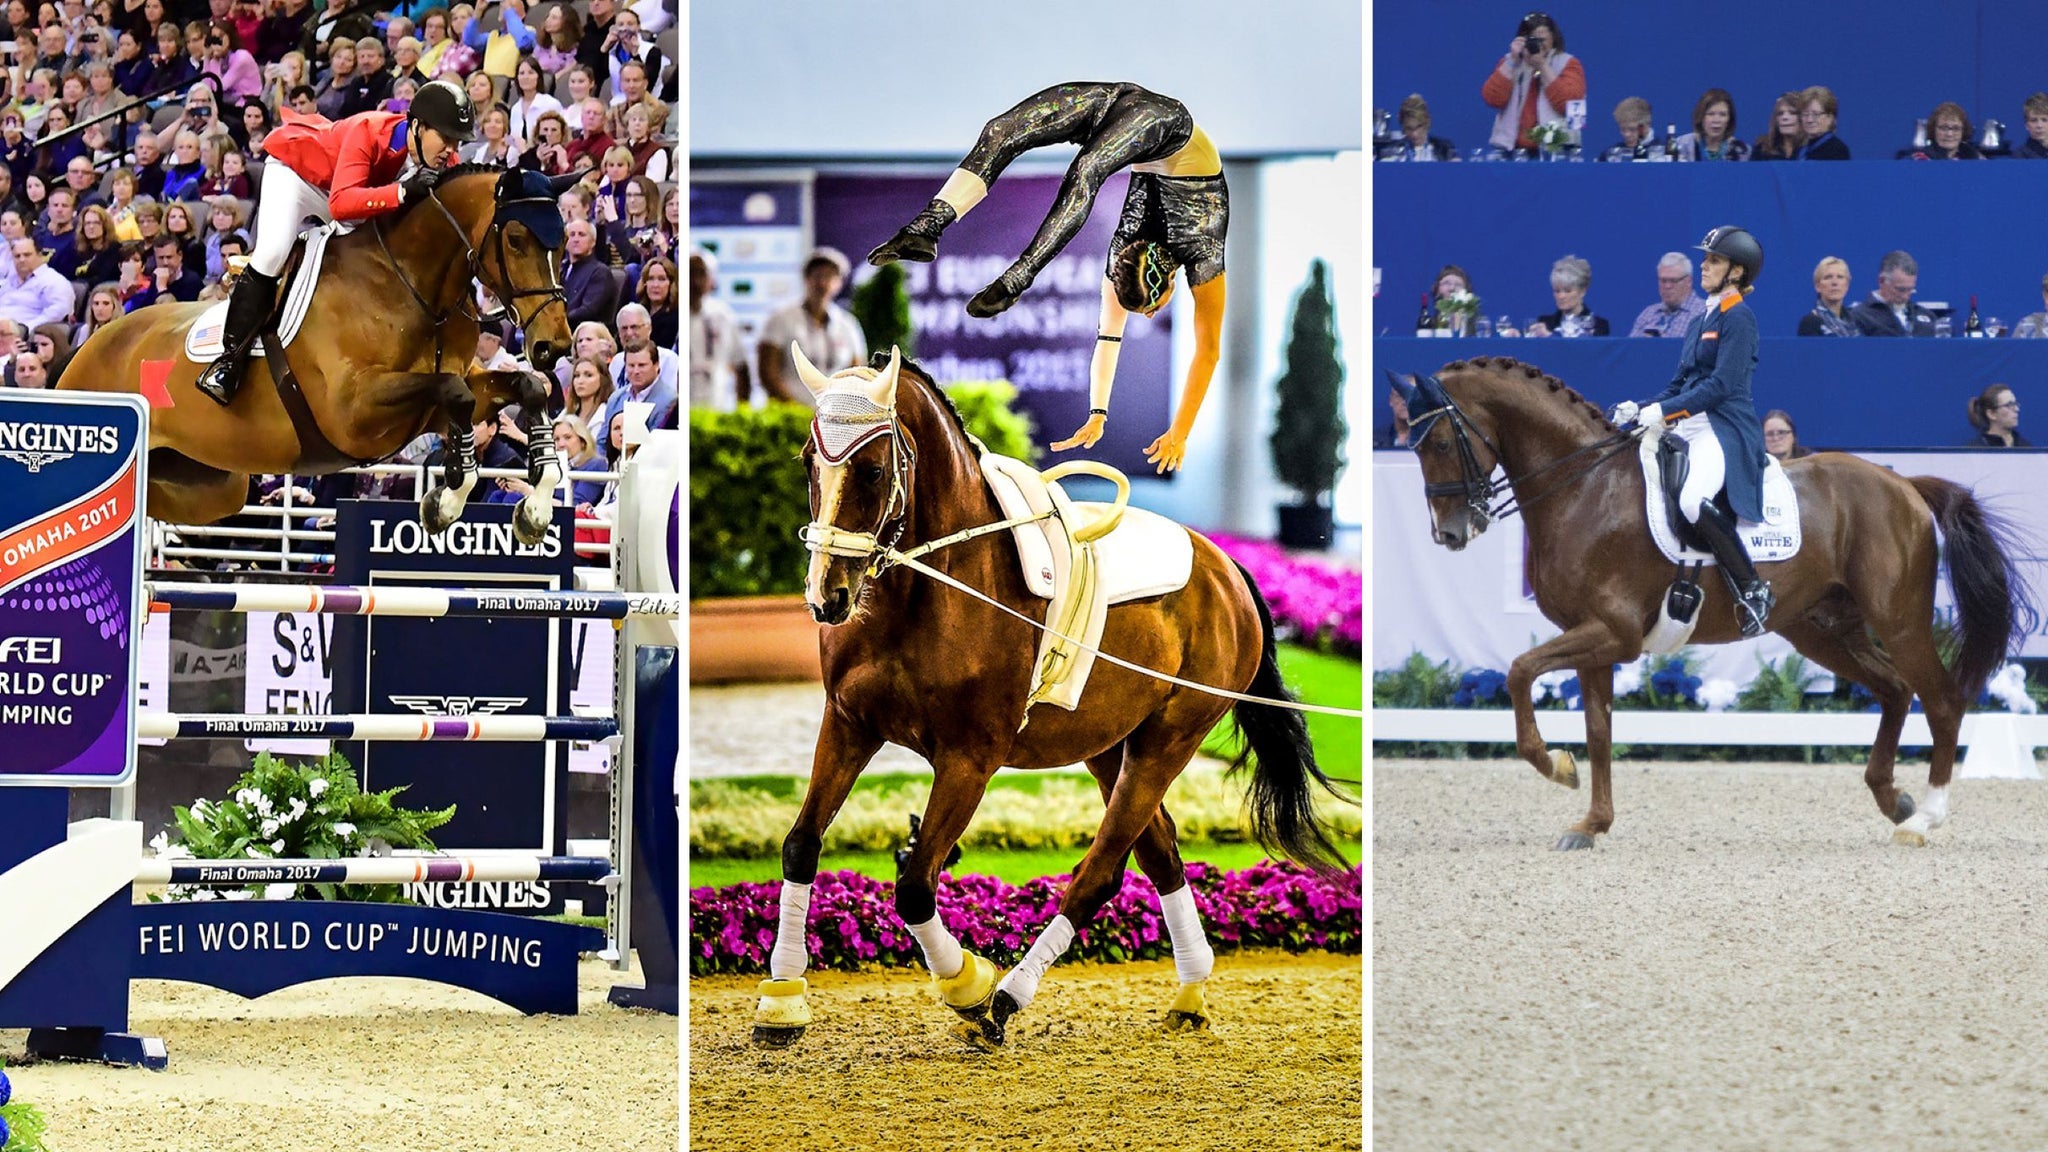 Round 1 – Longines FEI Jumping World Cup(TM) Finals